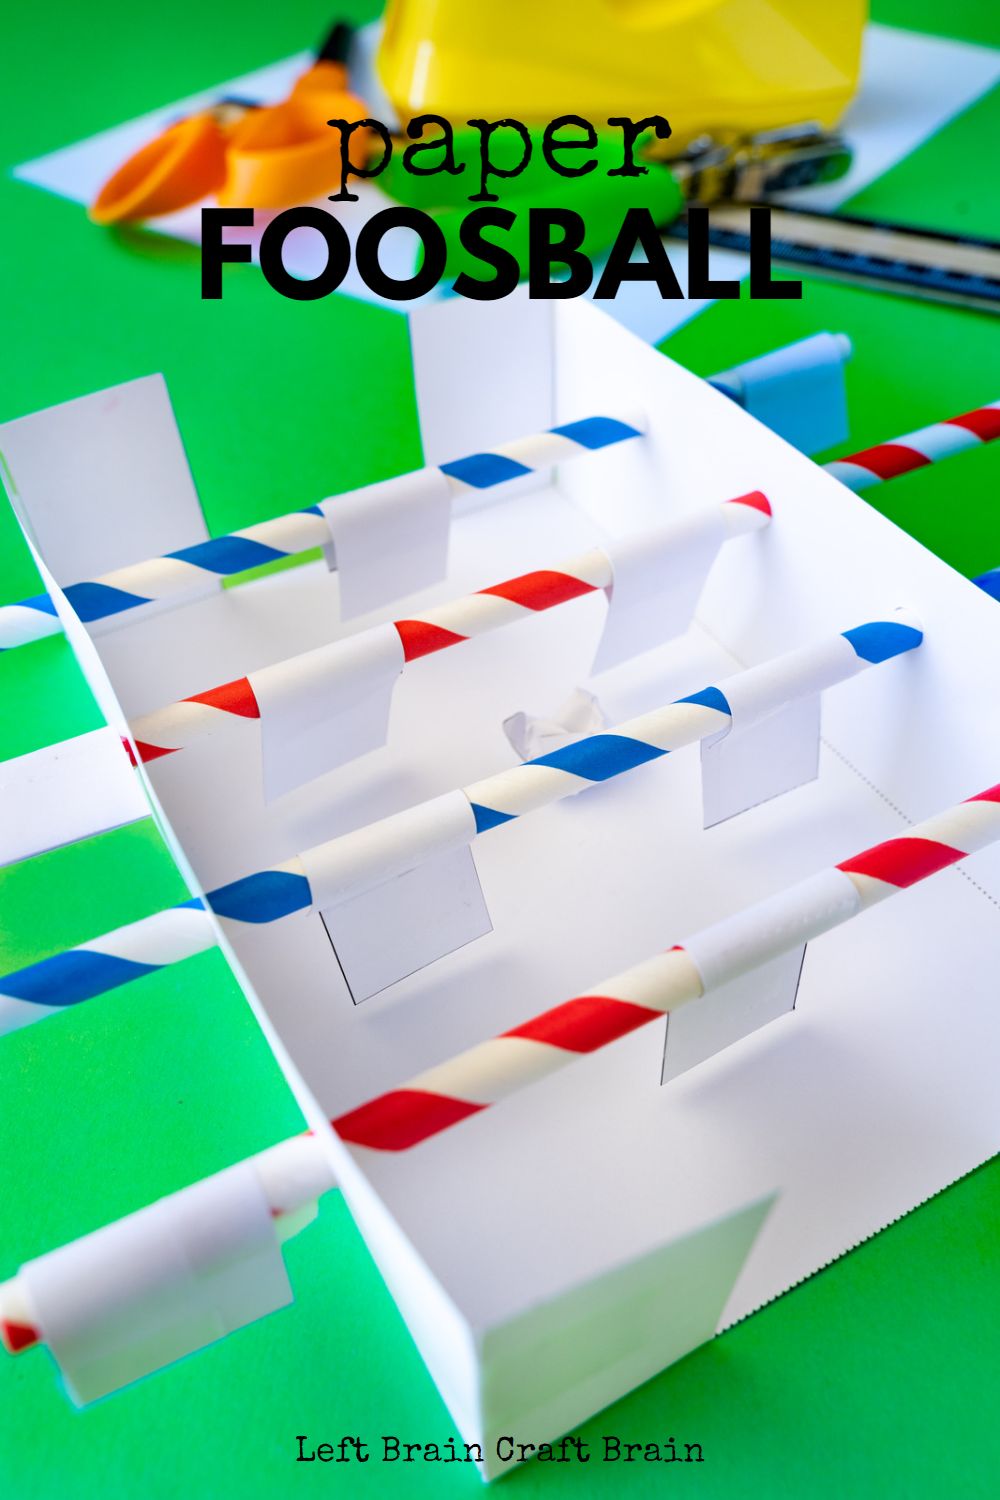 Grab some paper and straws to make a cool paper foosball game. It's a fun, mini version of people's favorite soccer and football game.